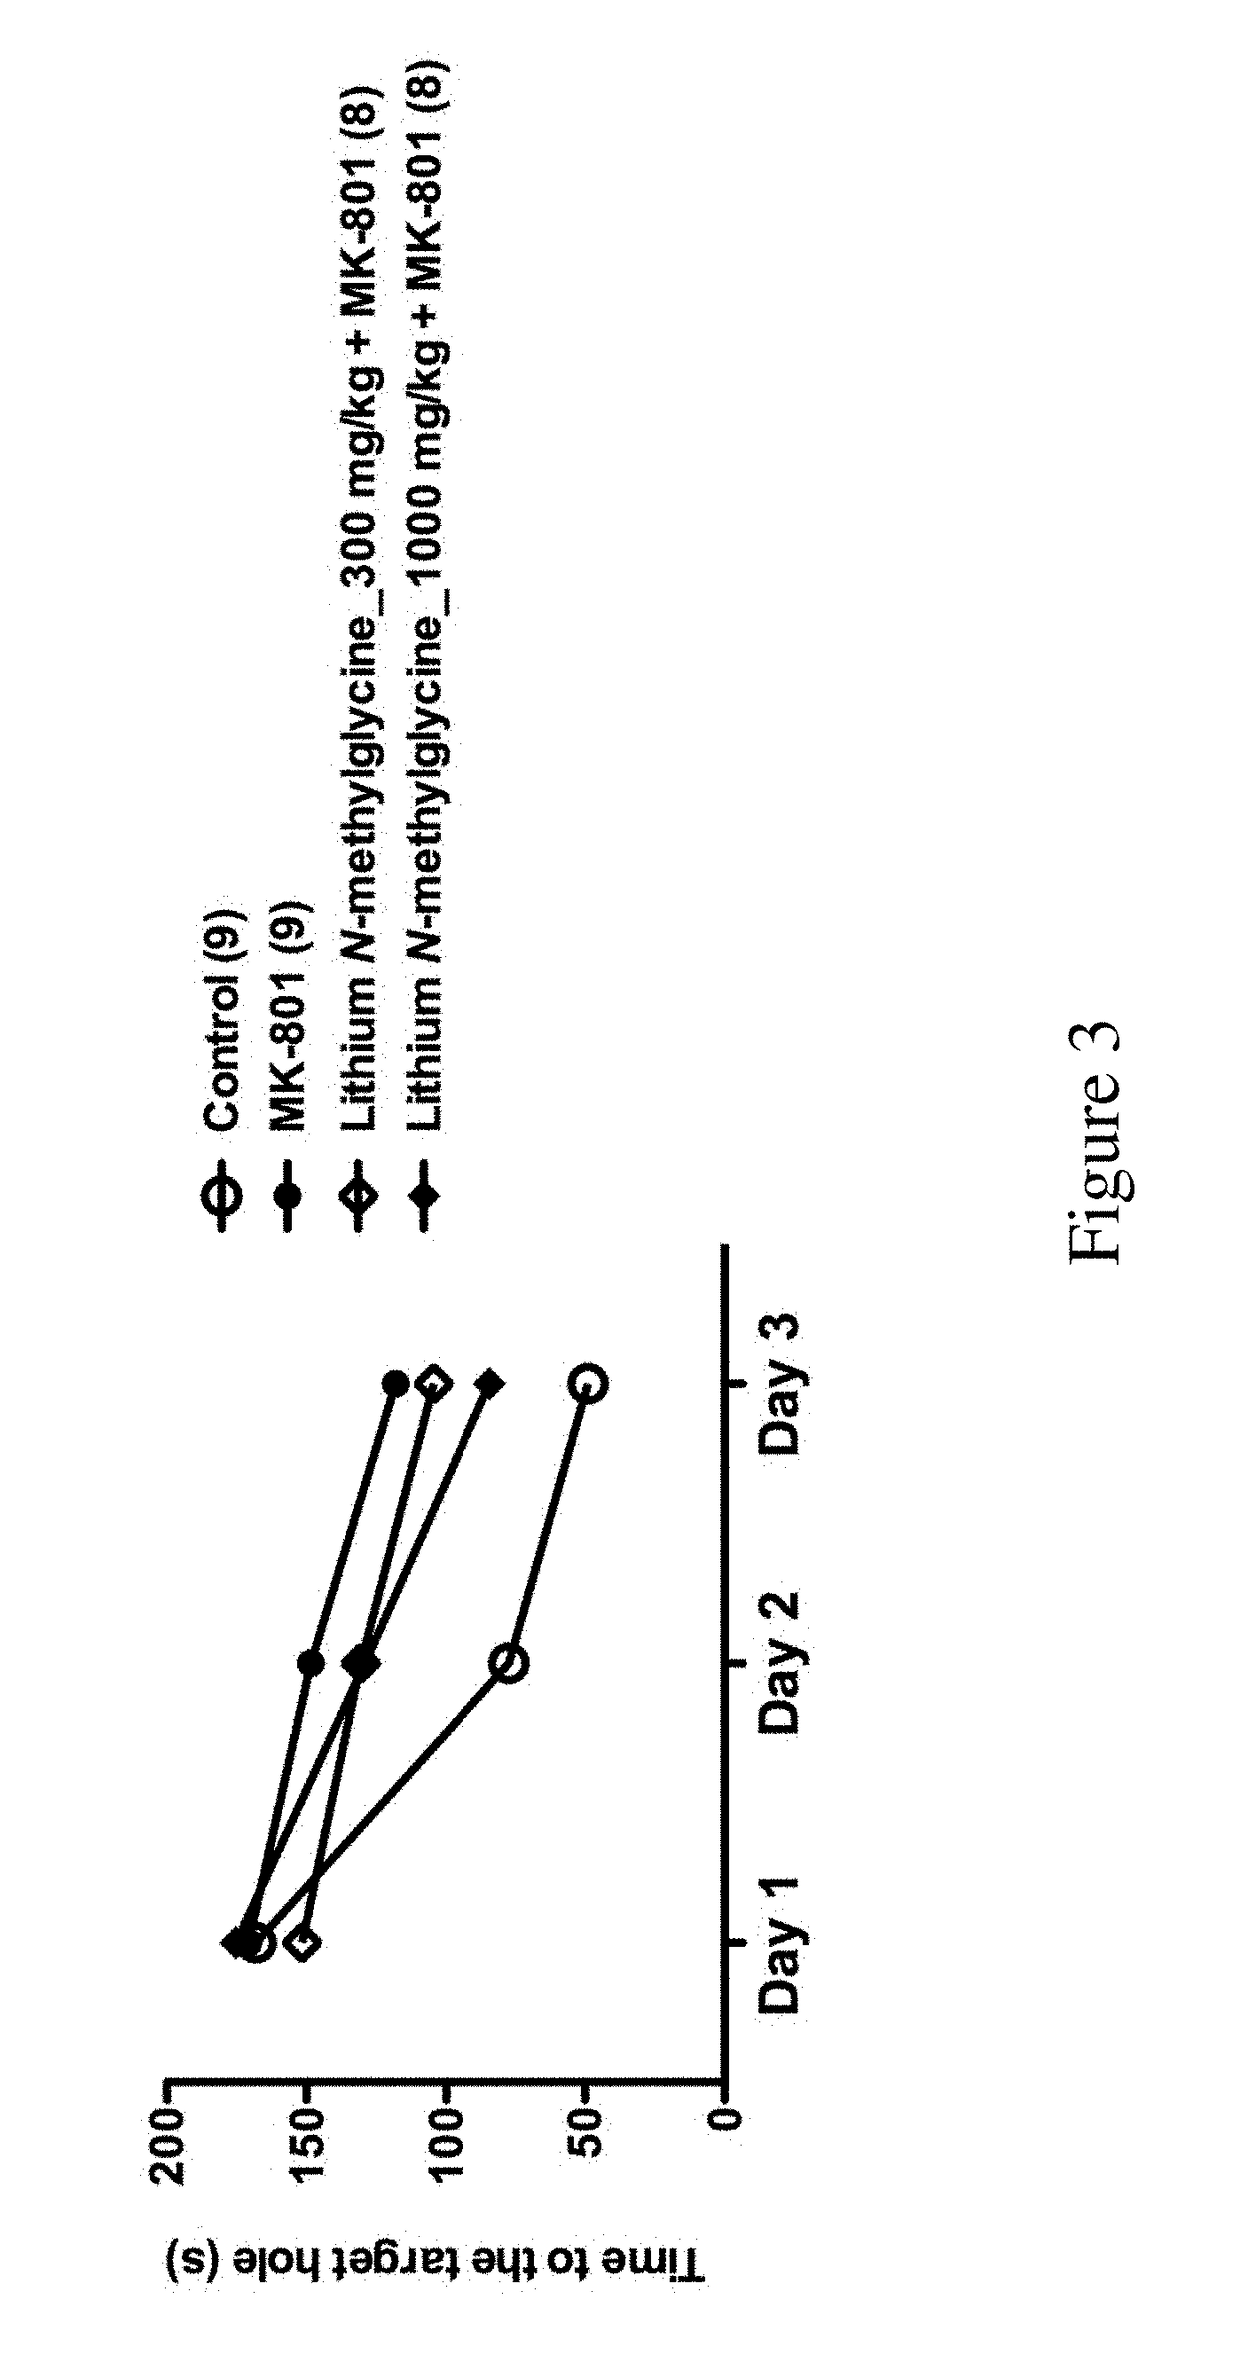 Lithium salts of N-substituted glycine compounds and uses thereof